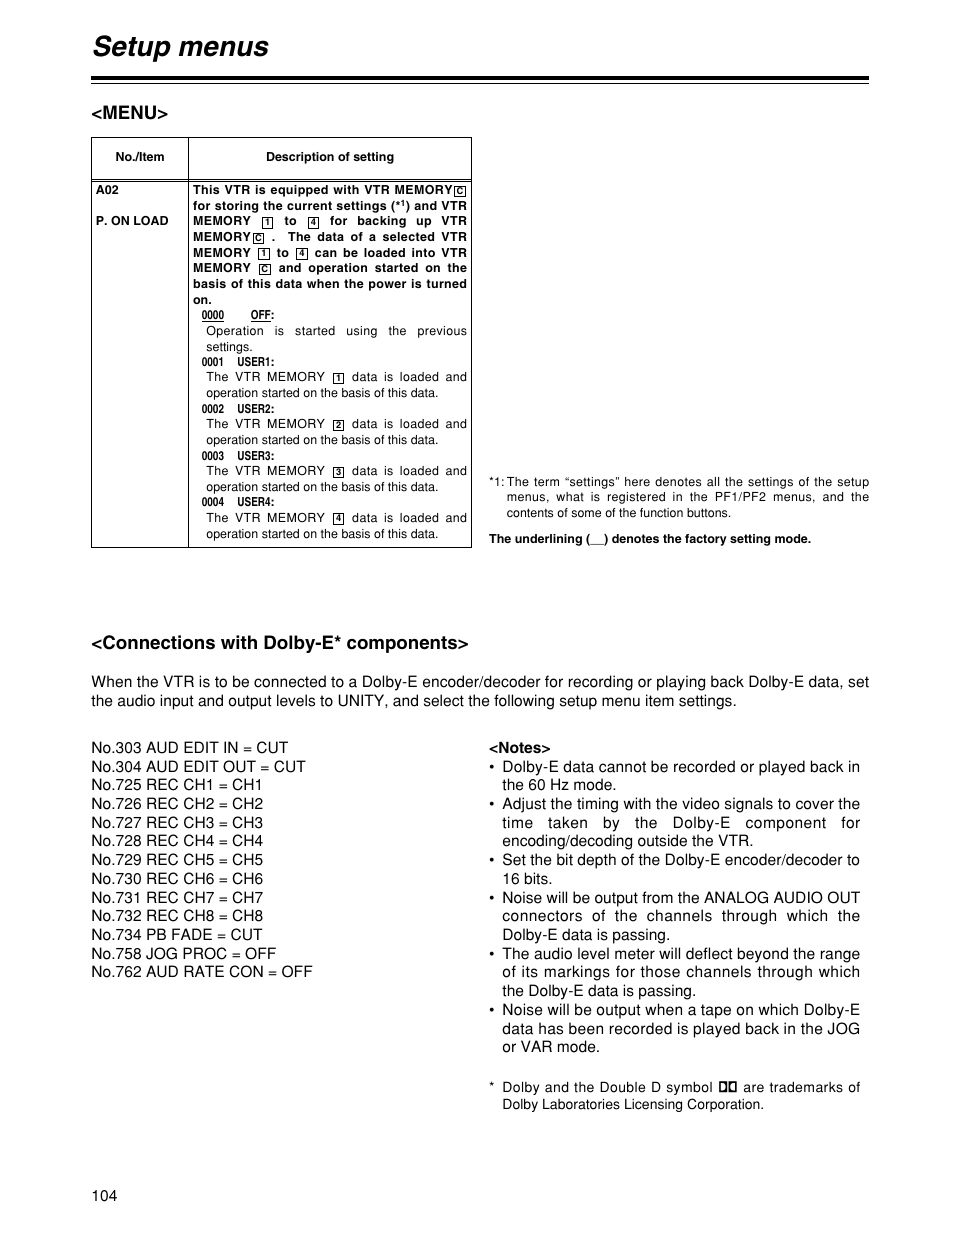 Setup menus, Menu, Connections with dolby-e* components | Panasonic HD1700pe User Manual | Page 104 / 134